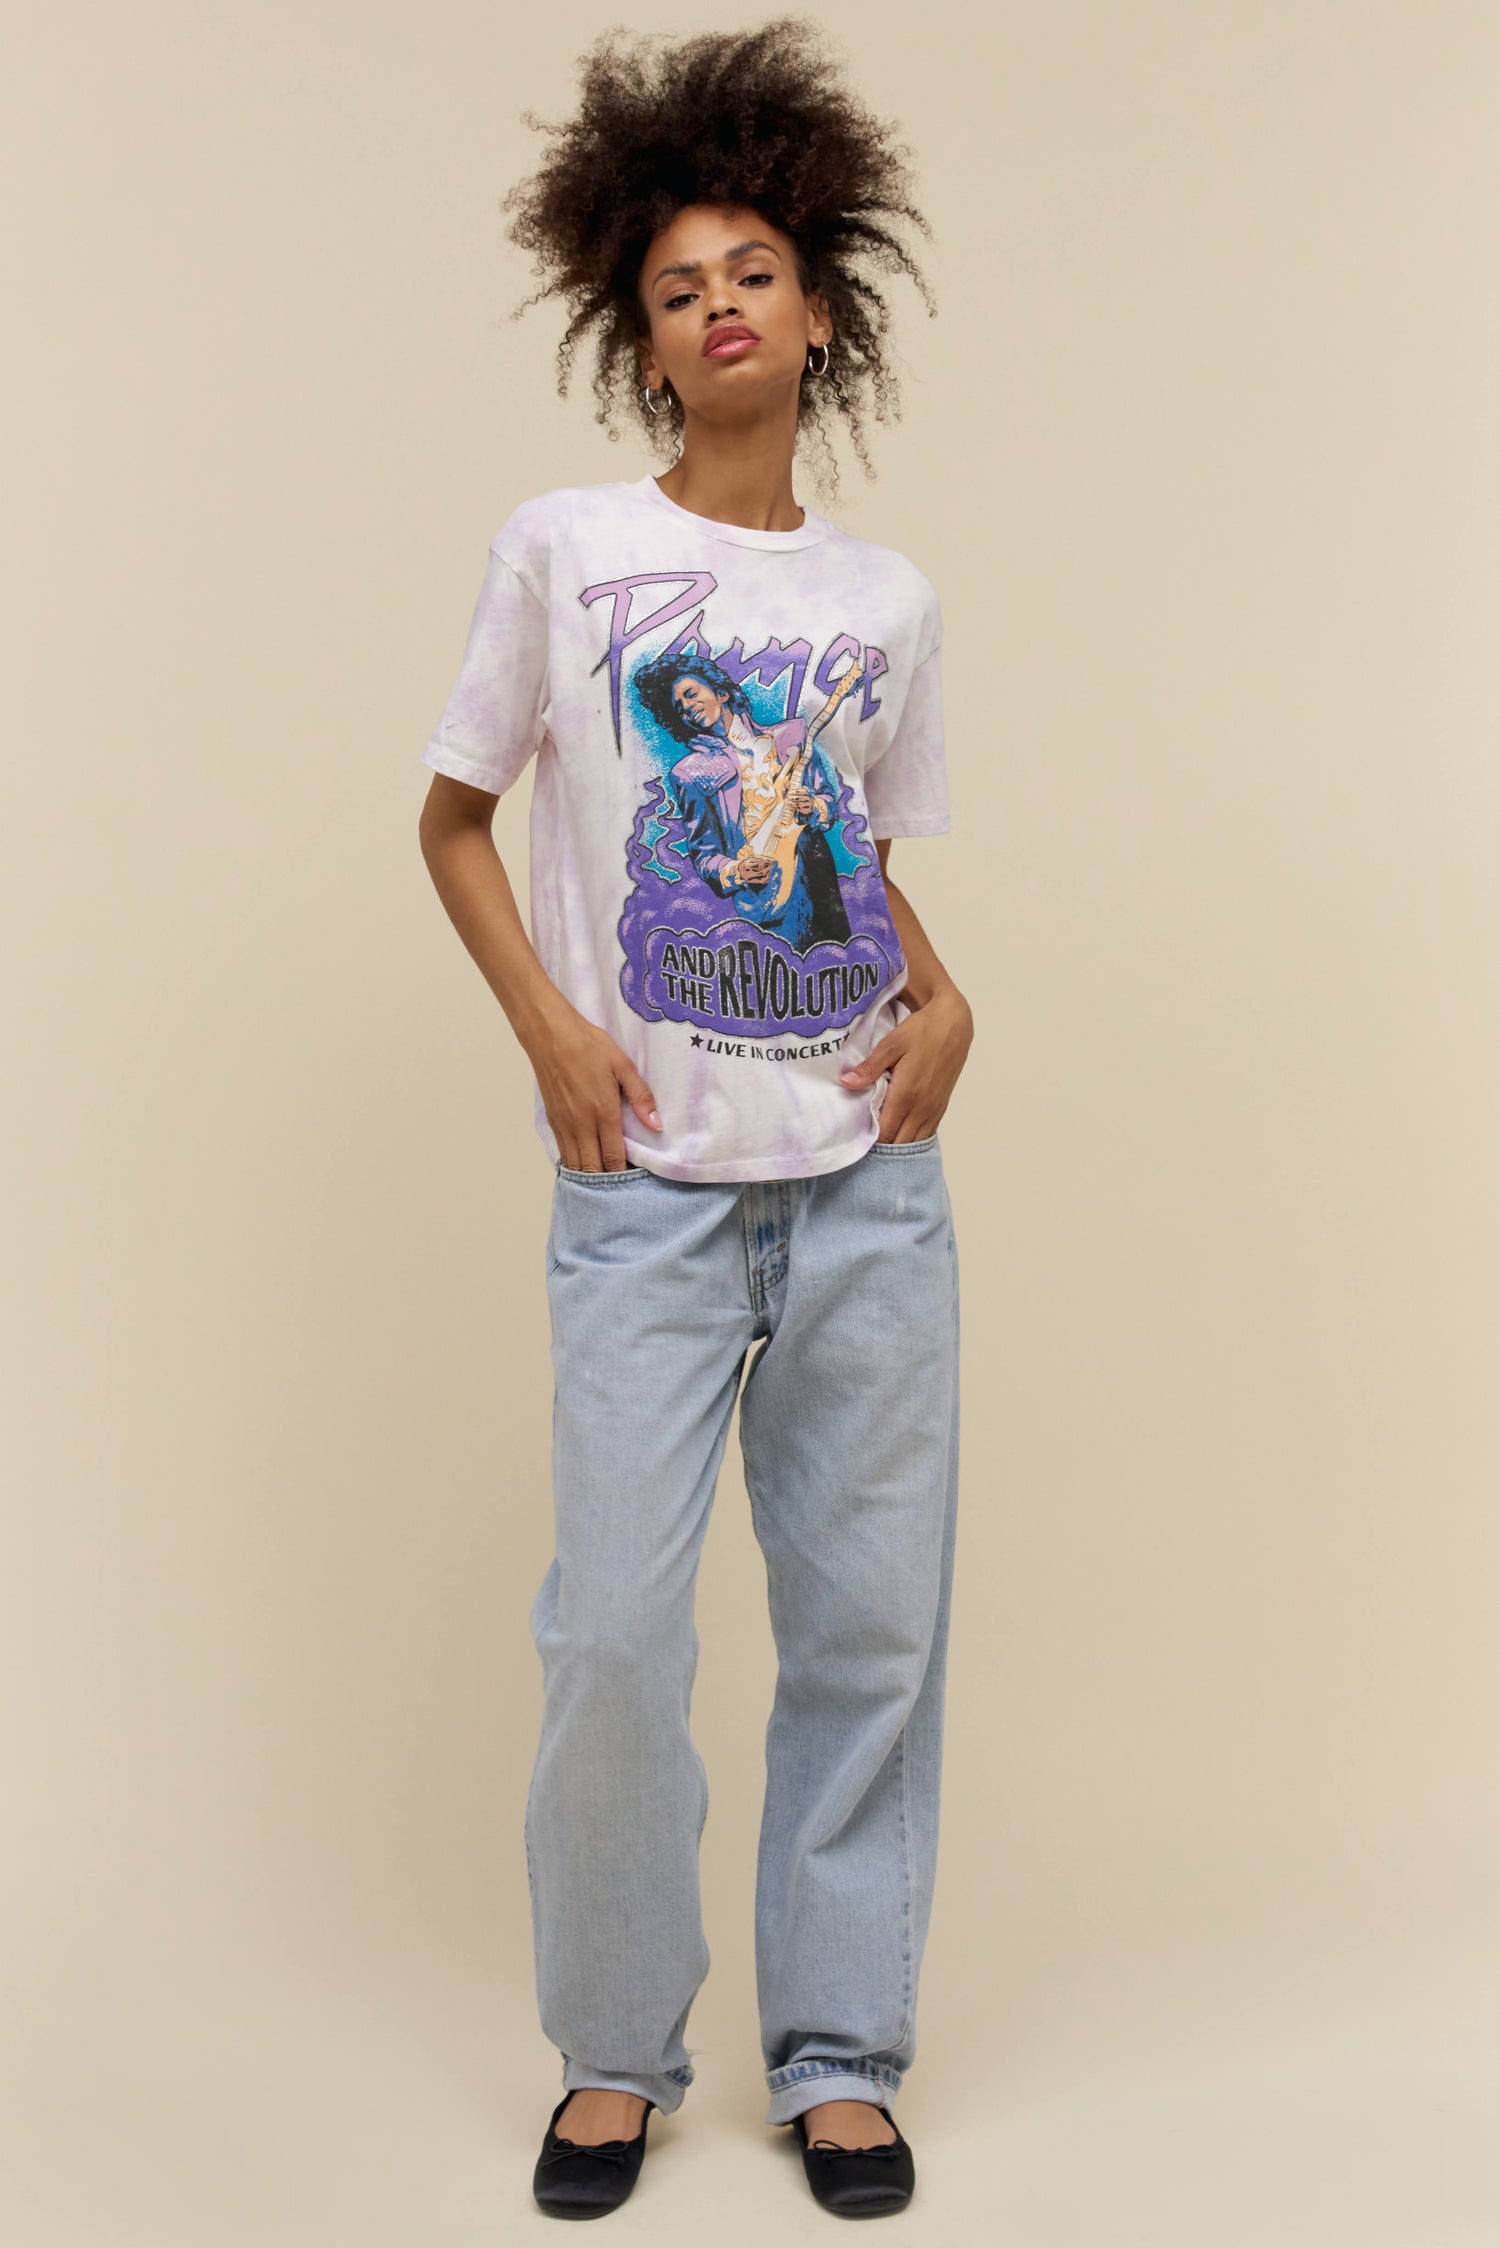 A model featuring a white tee designed with a photo of Prince performing at a concert.